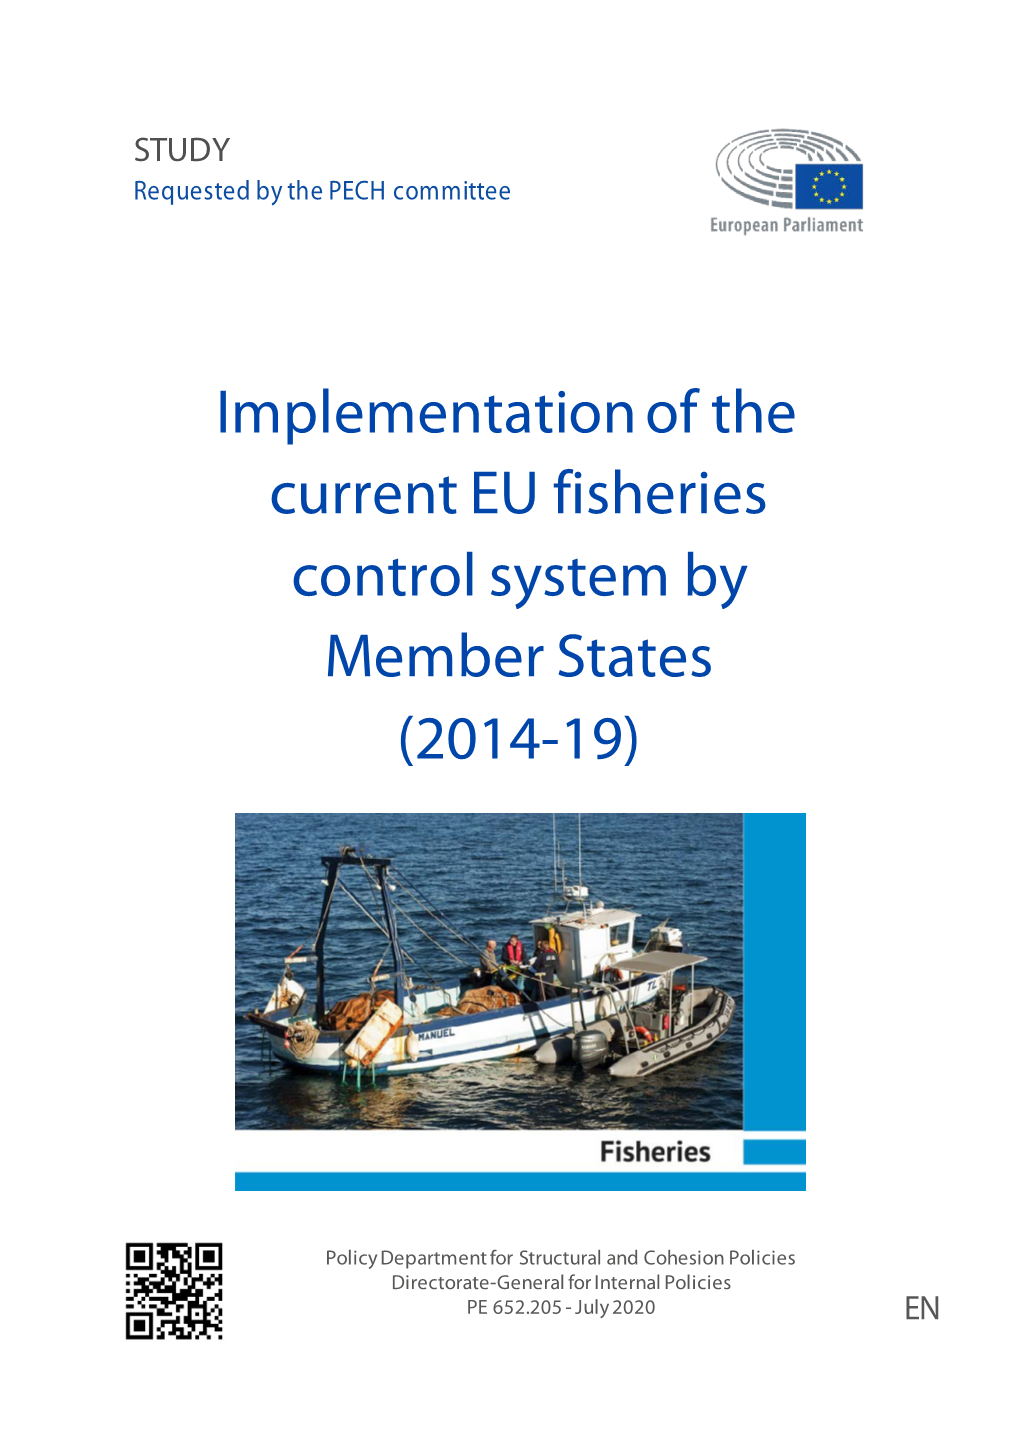 Implementation of the Current EU Fisheries Control System by Member States (2014-19)